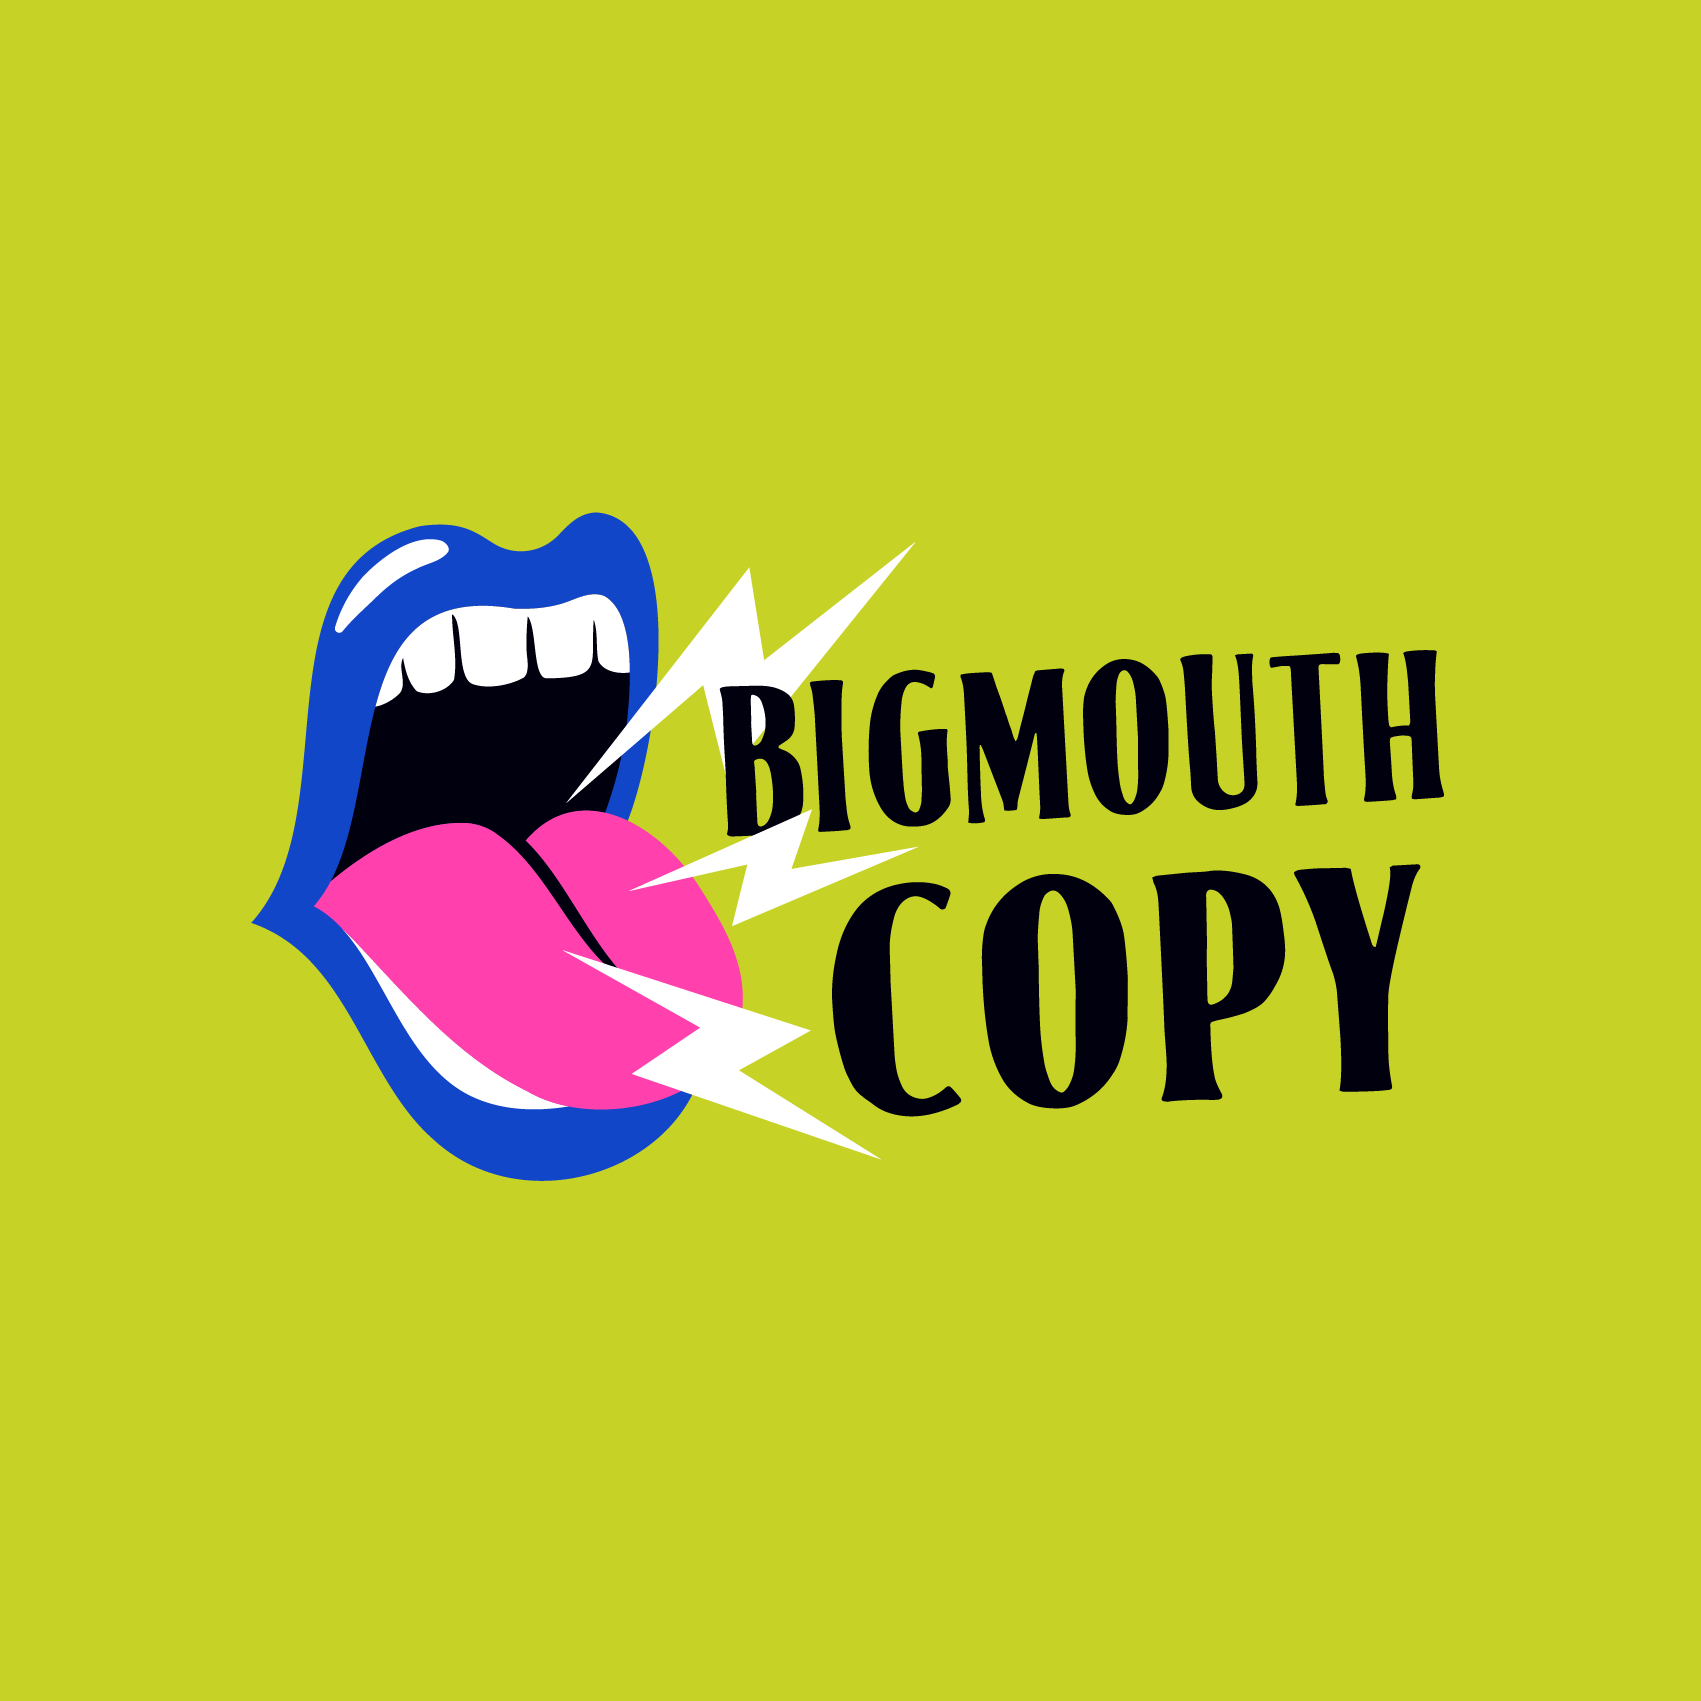  The Bigmouth Copy Logo on a lime green background. 